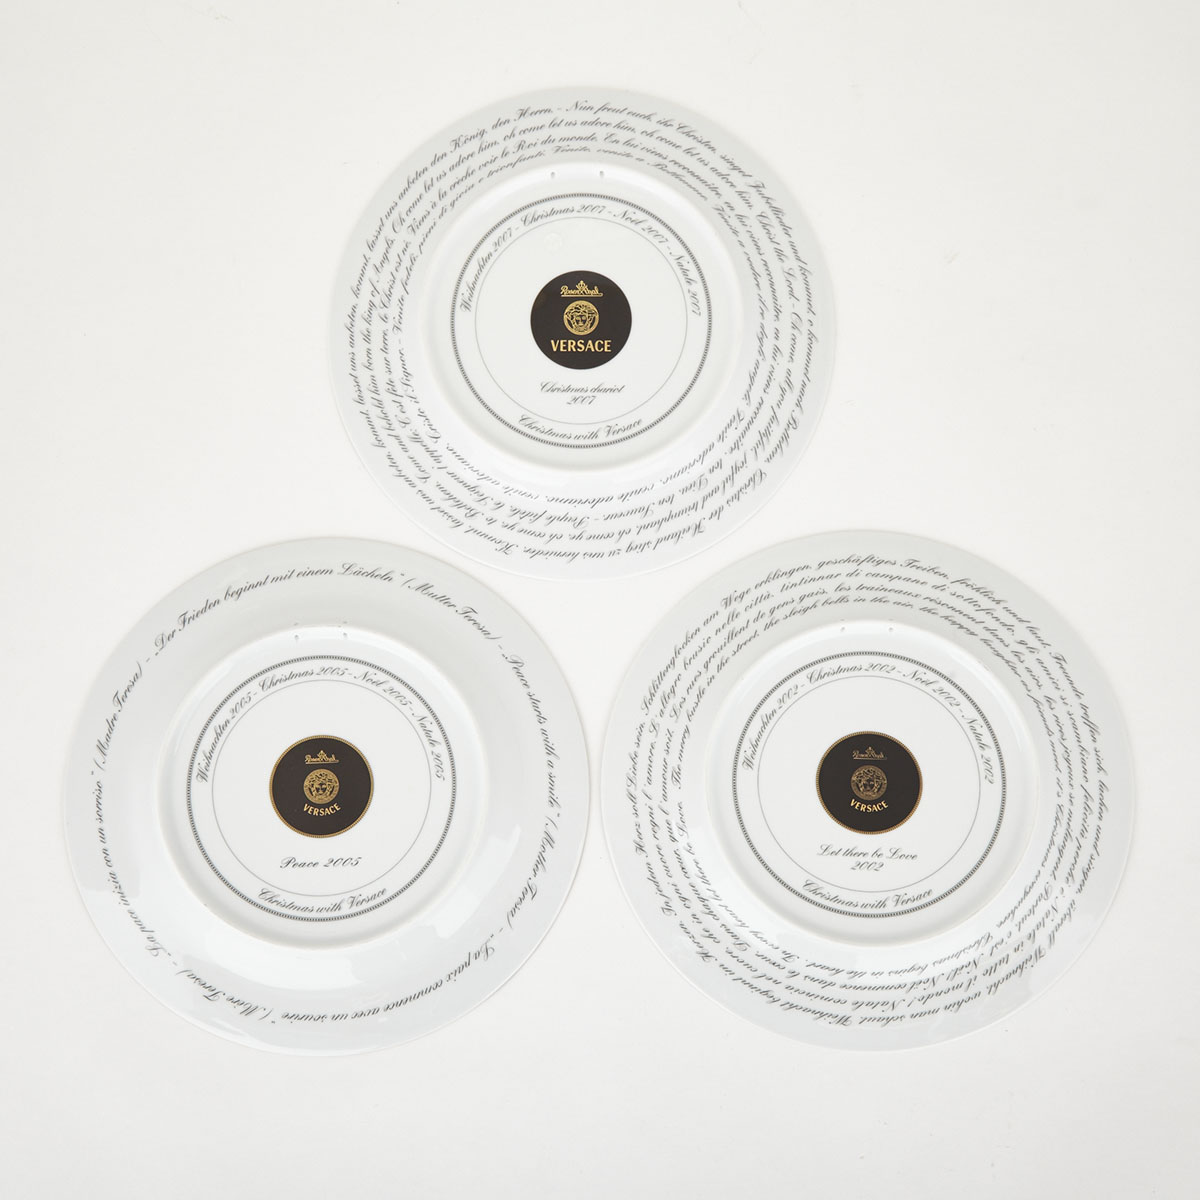 Three Rosenthal Christmas Plates, designed by Versace, 2002, 2005 and 2007